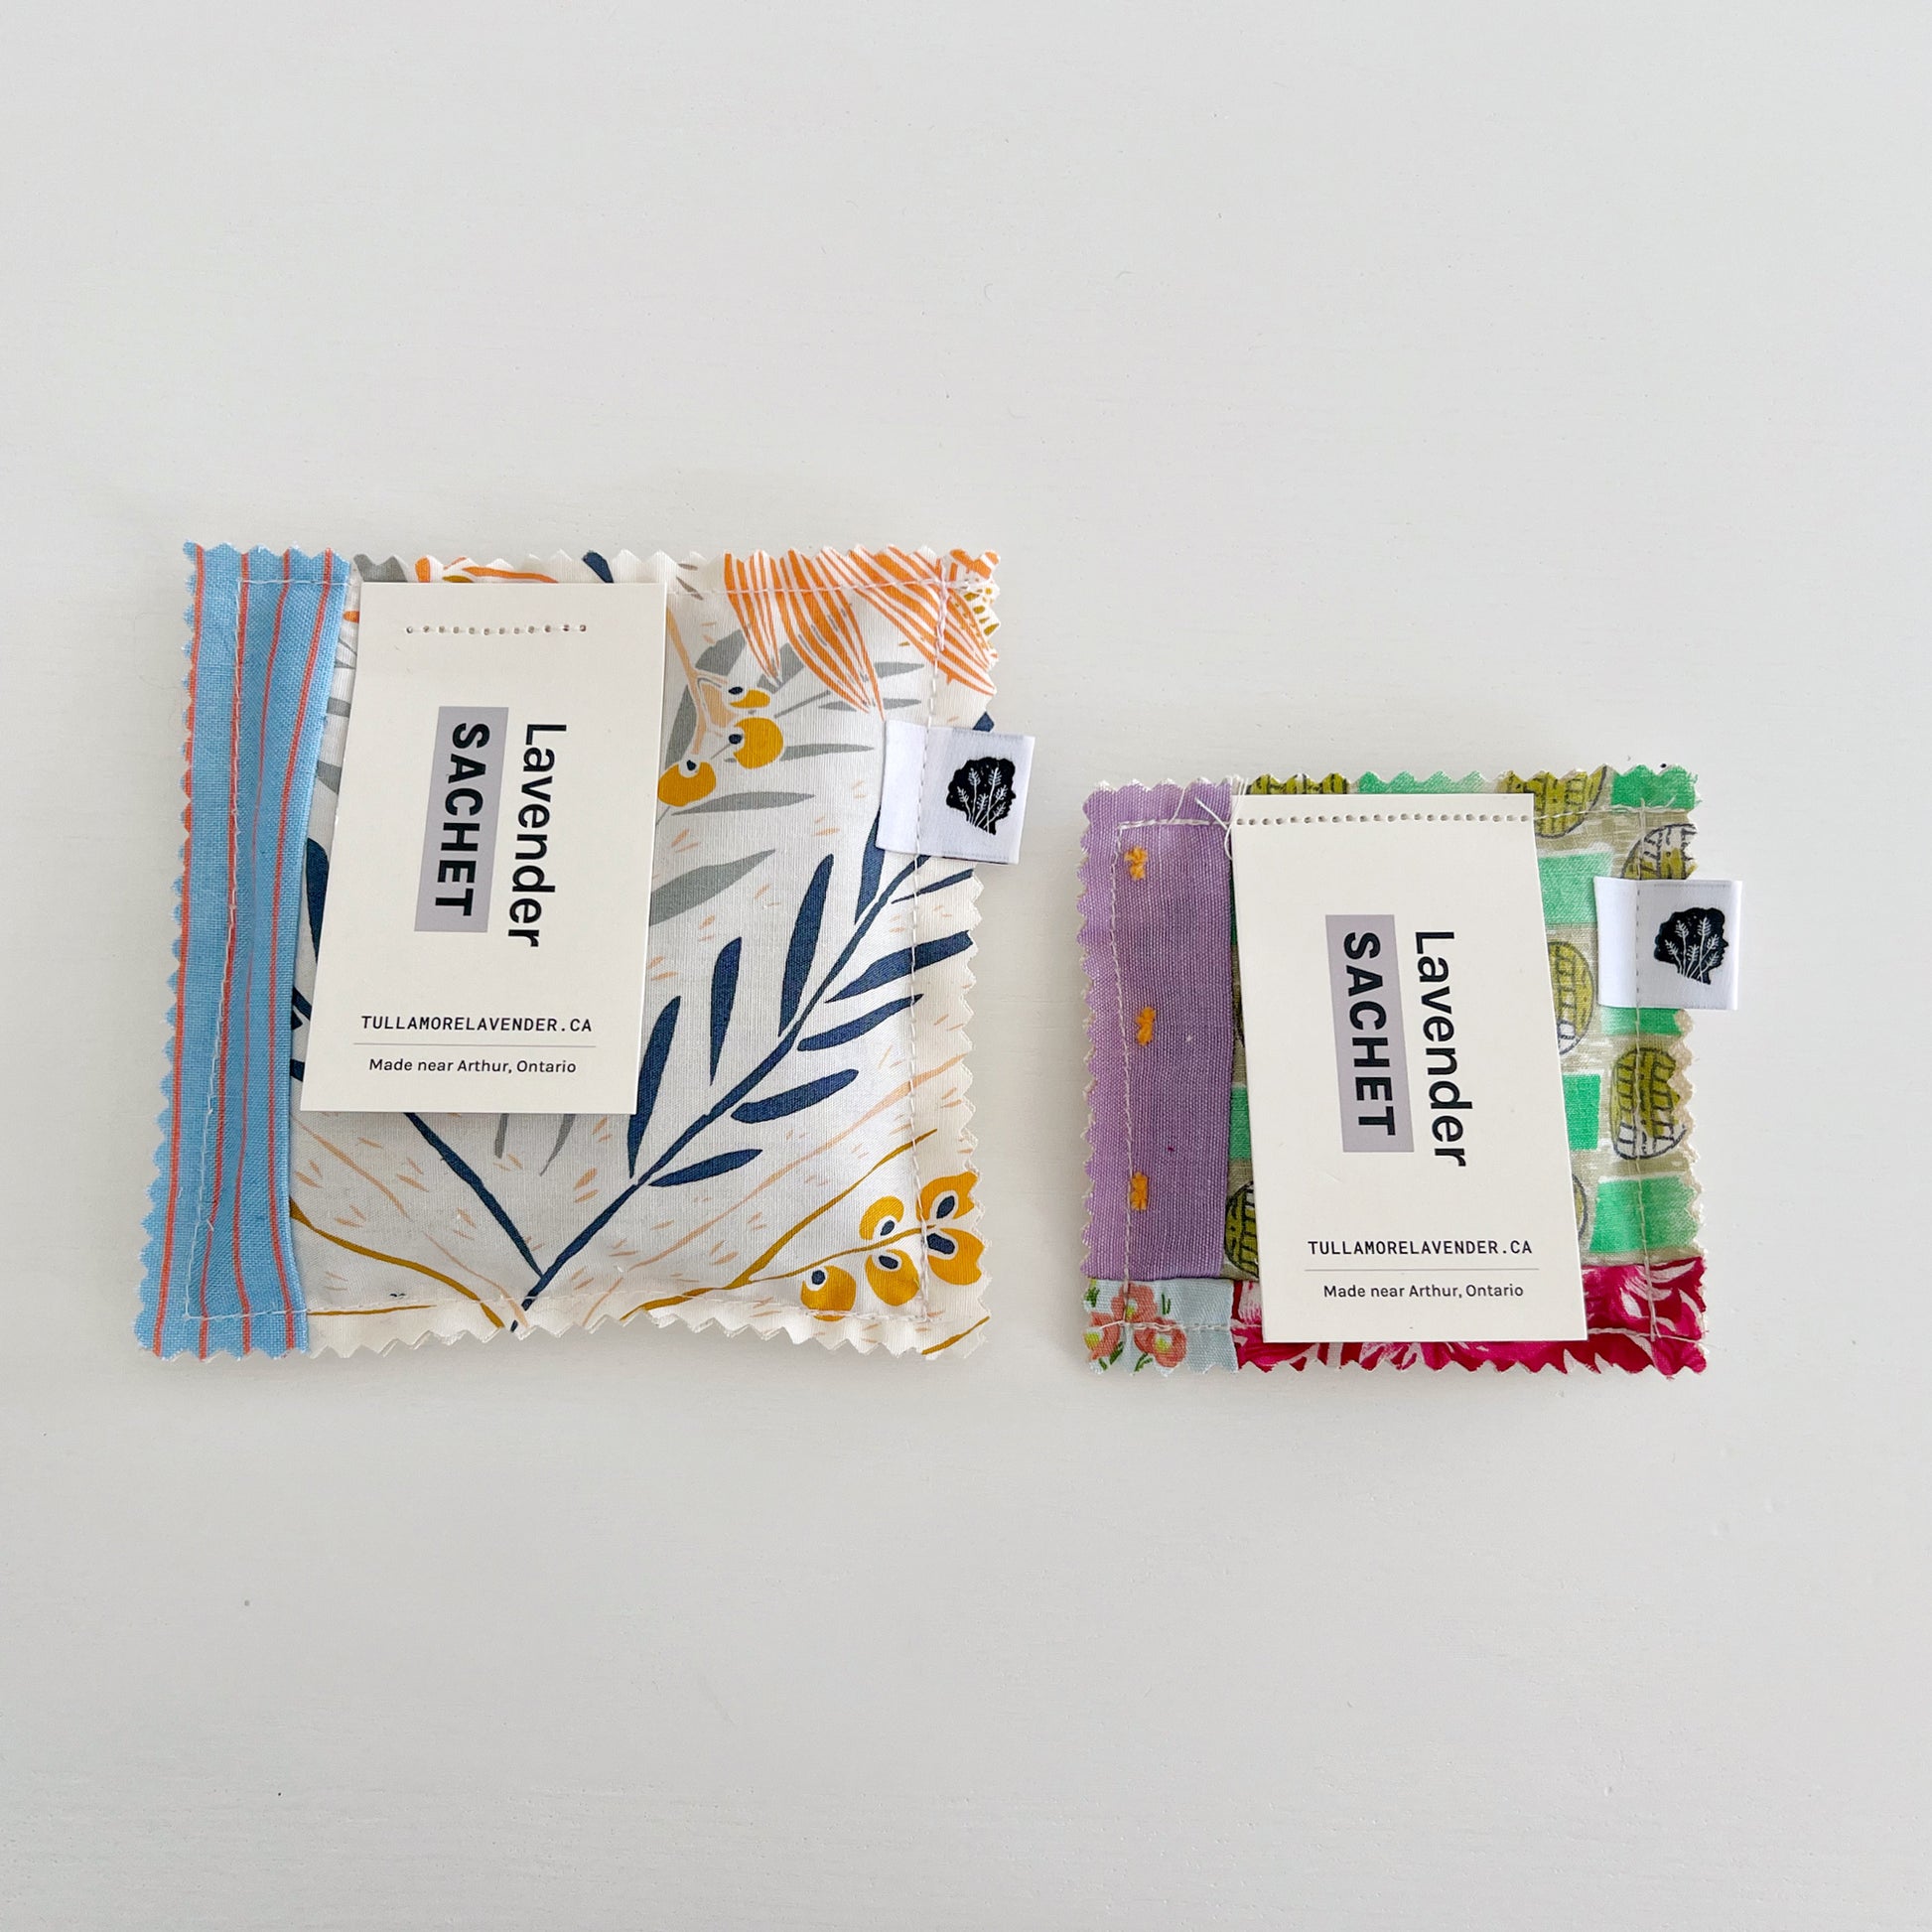 One large and one small fabric sachets lay on white background. Tags say "Lavender Sachet"